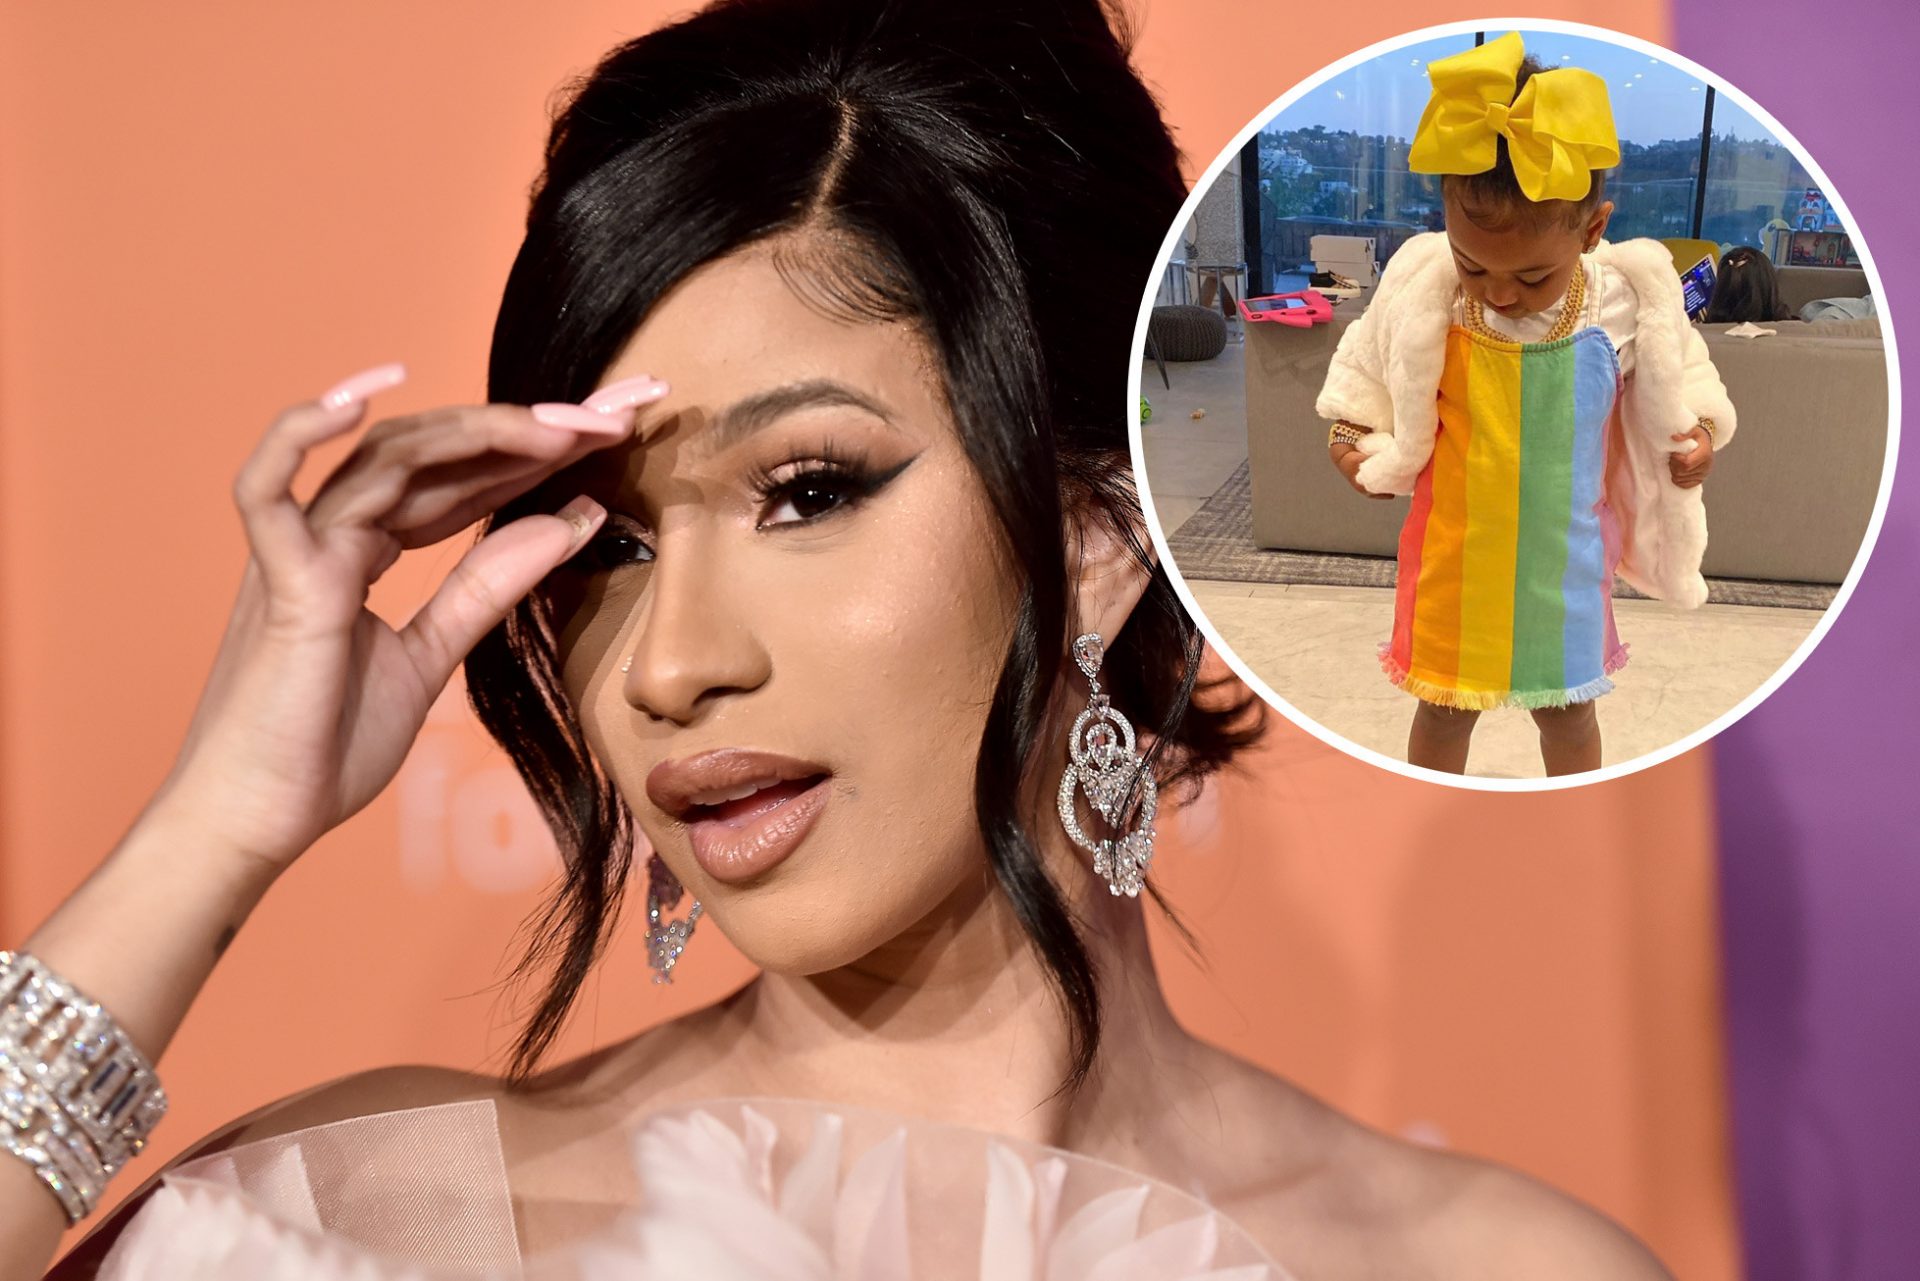 Cardi B clothes daughter Kulture in rainbow costume for Pleasure month